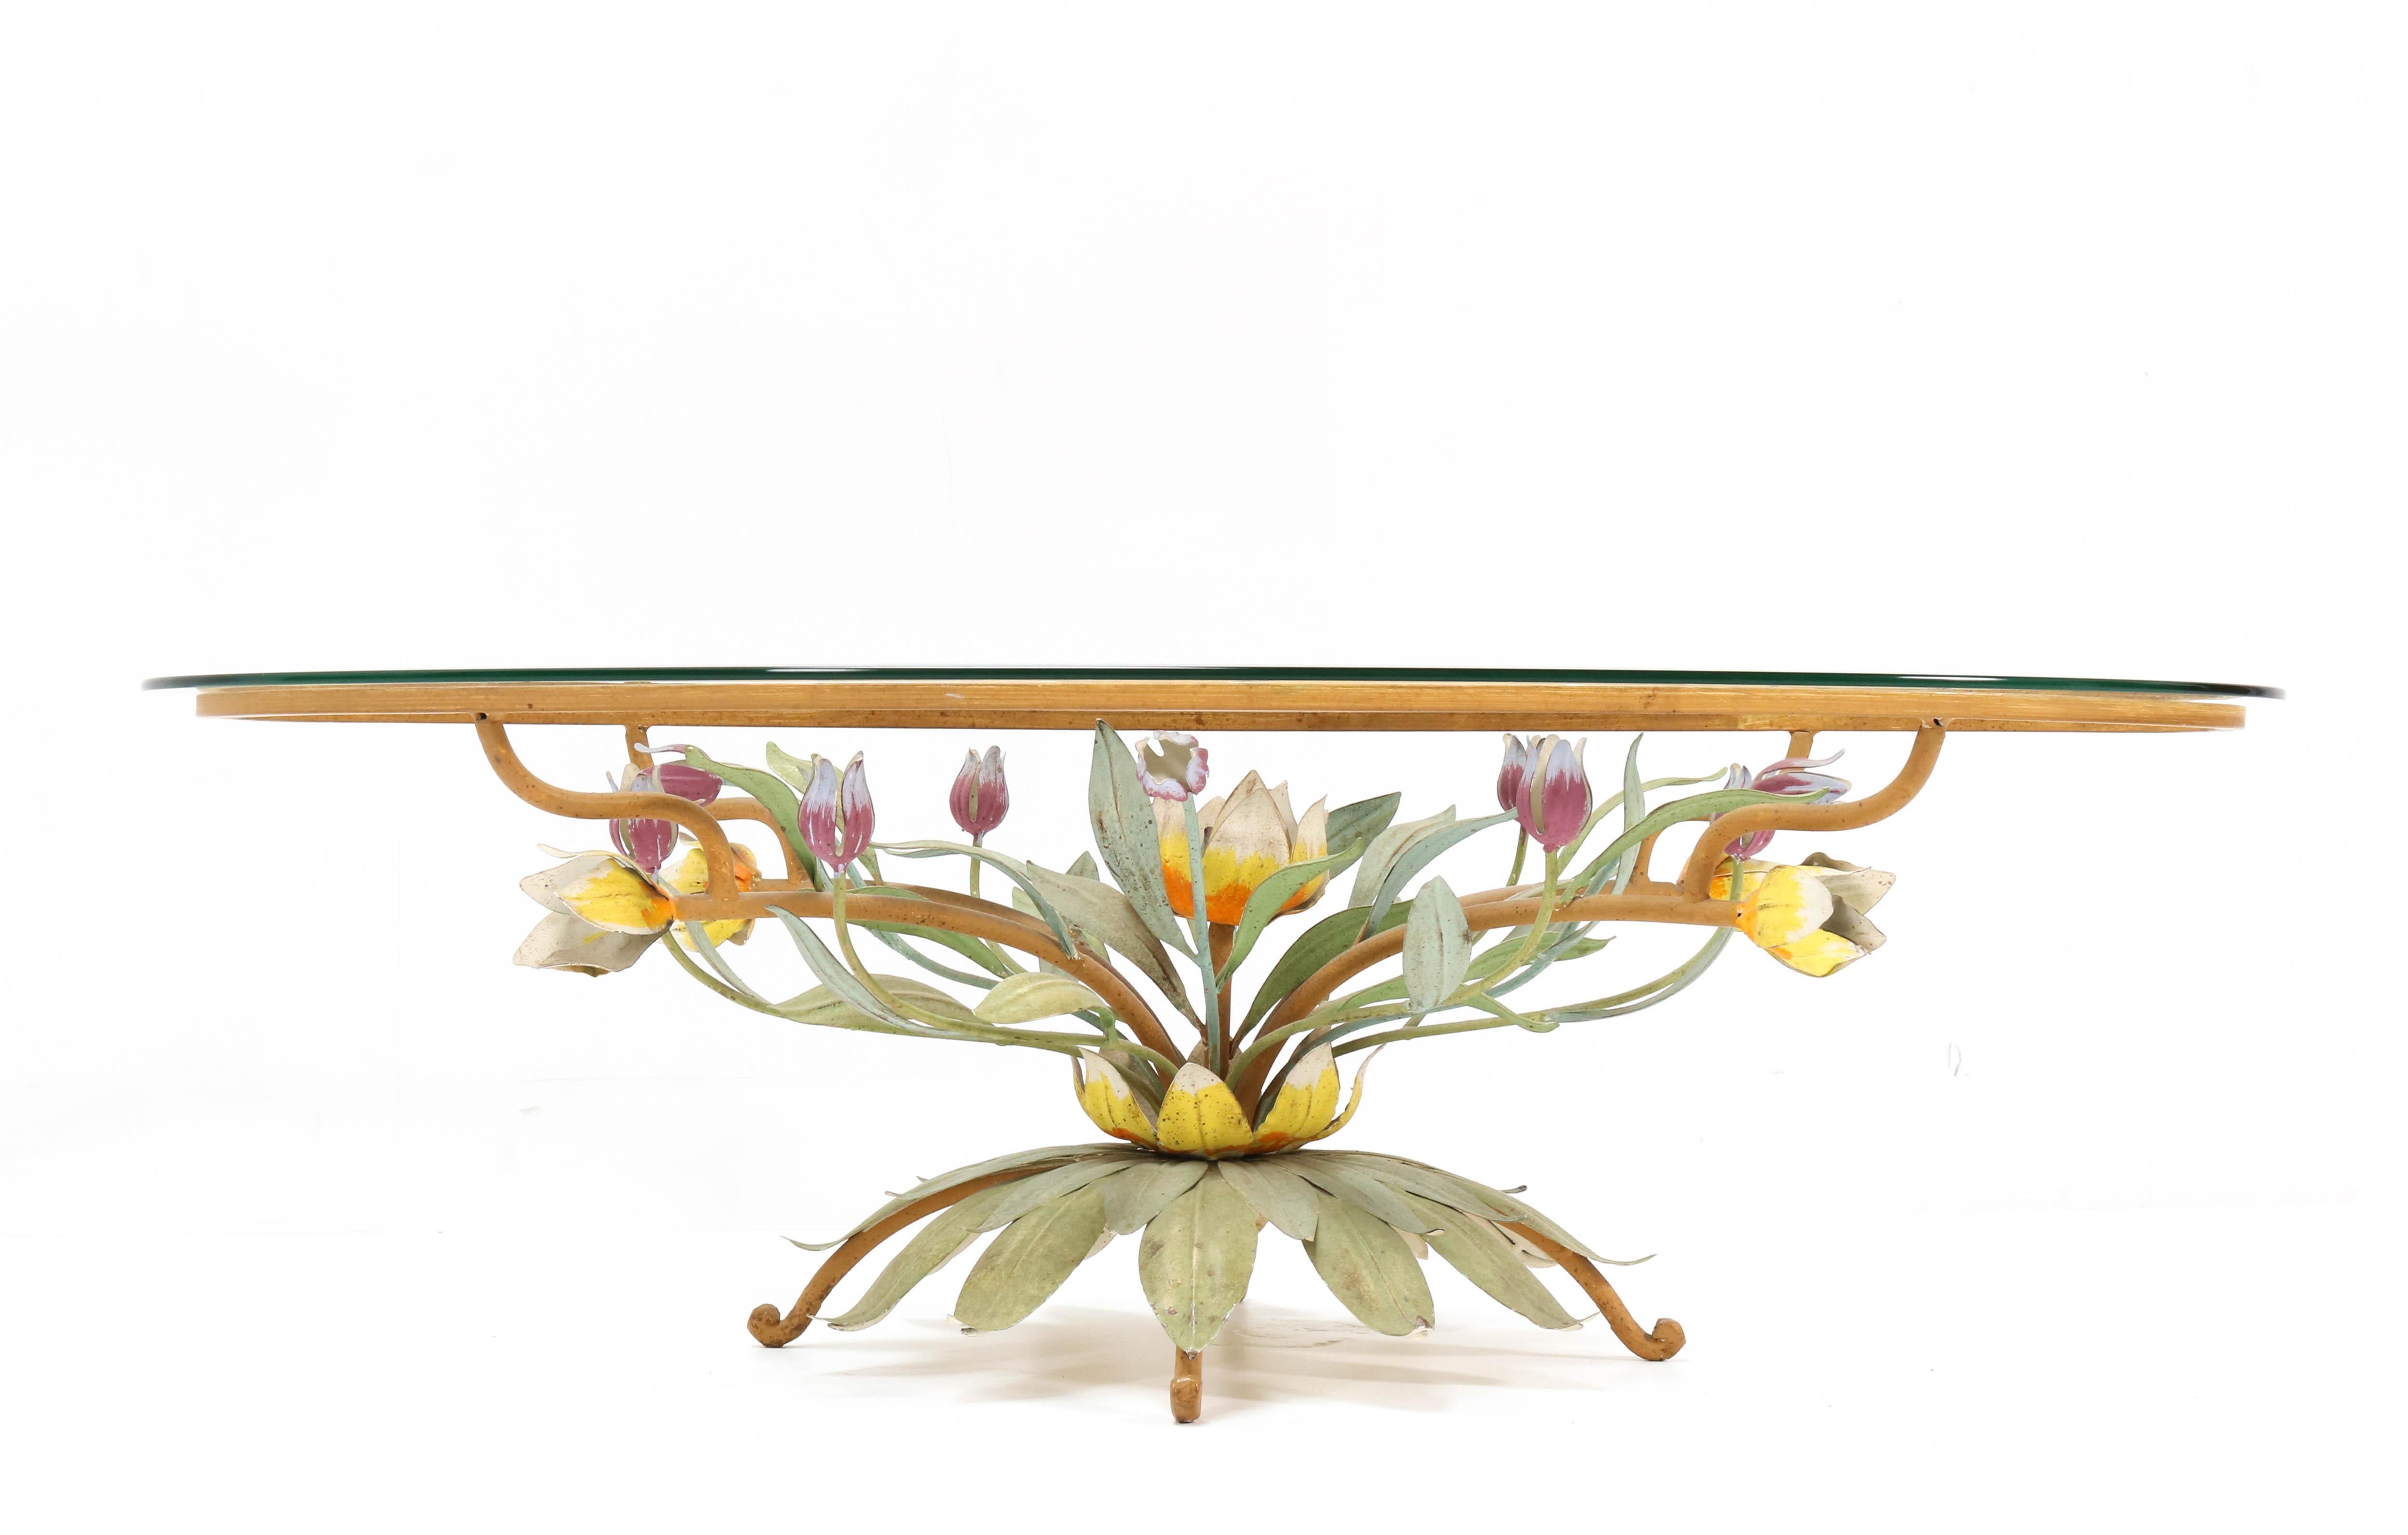 Magnificent and rare Hollywood Regency coffee table.
Striking French design from the 1970s.
Original lacquered metal frame with flowers in various colors.
The original glass top is beveled.
This wonderful piece of furniture is very decorative in